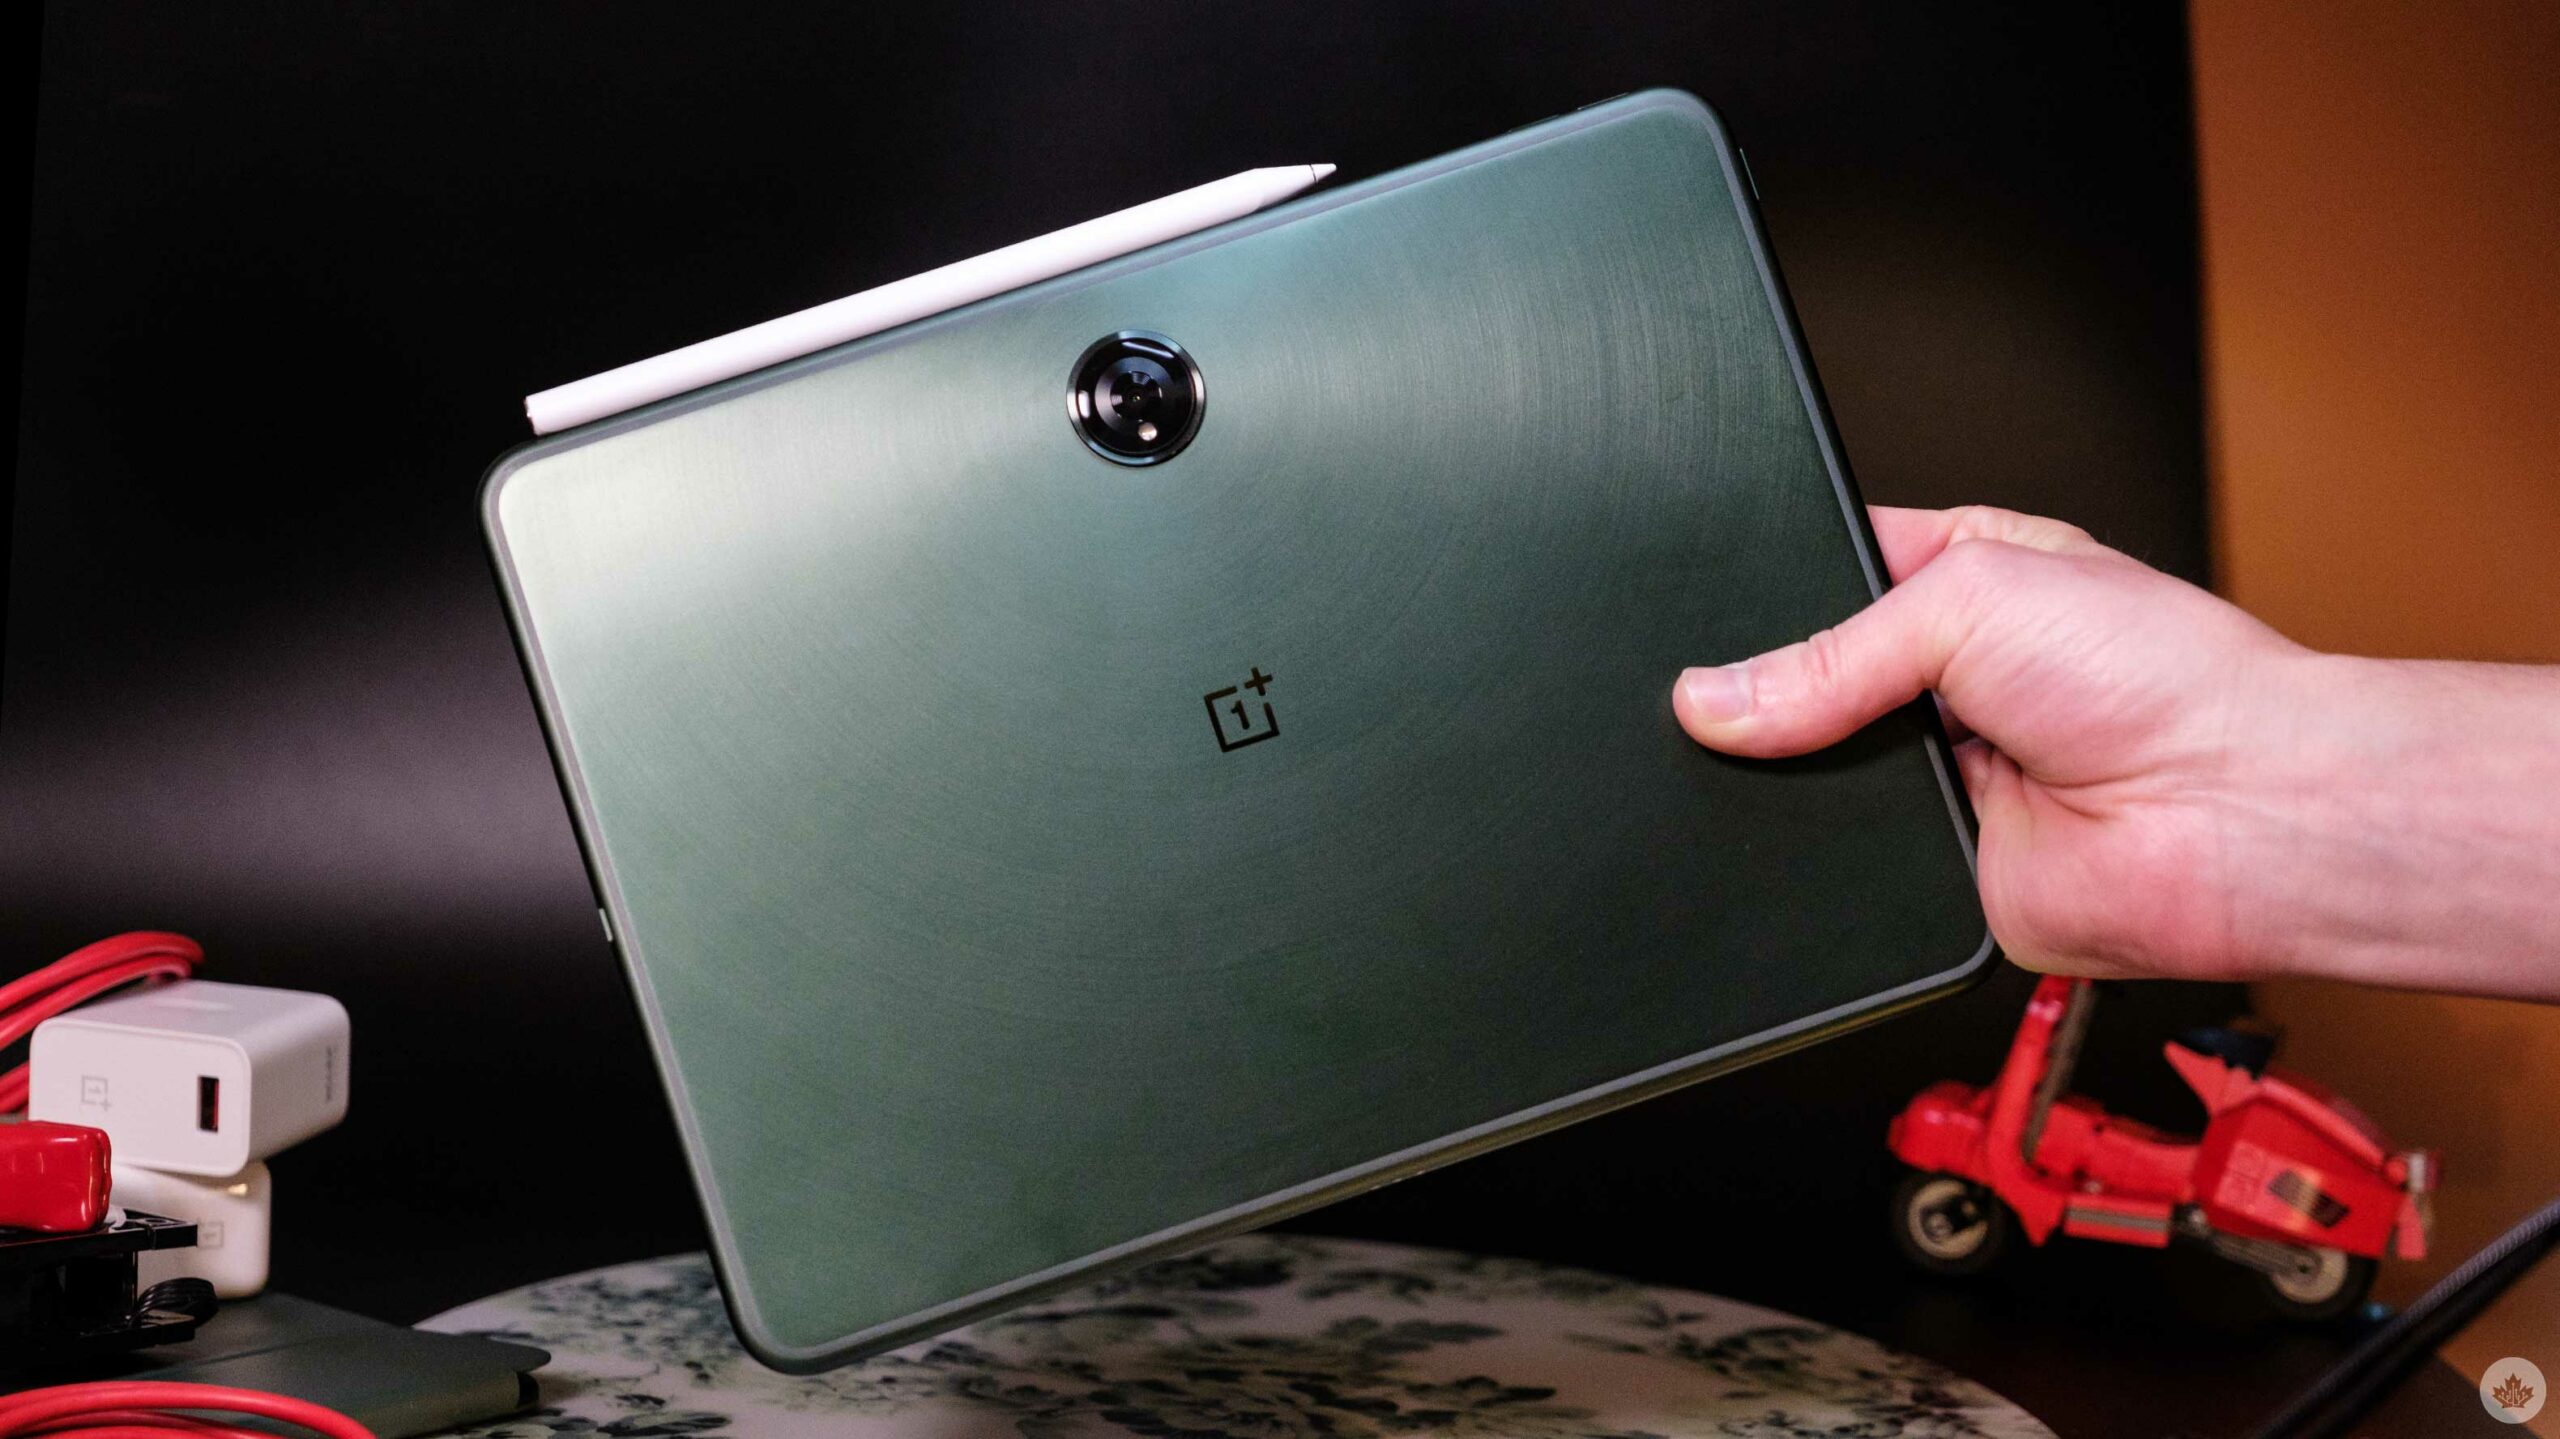 OnePlus Pad Go Could Be The Affordable Android Tablet To Focus On